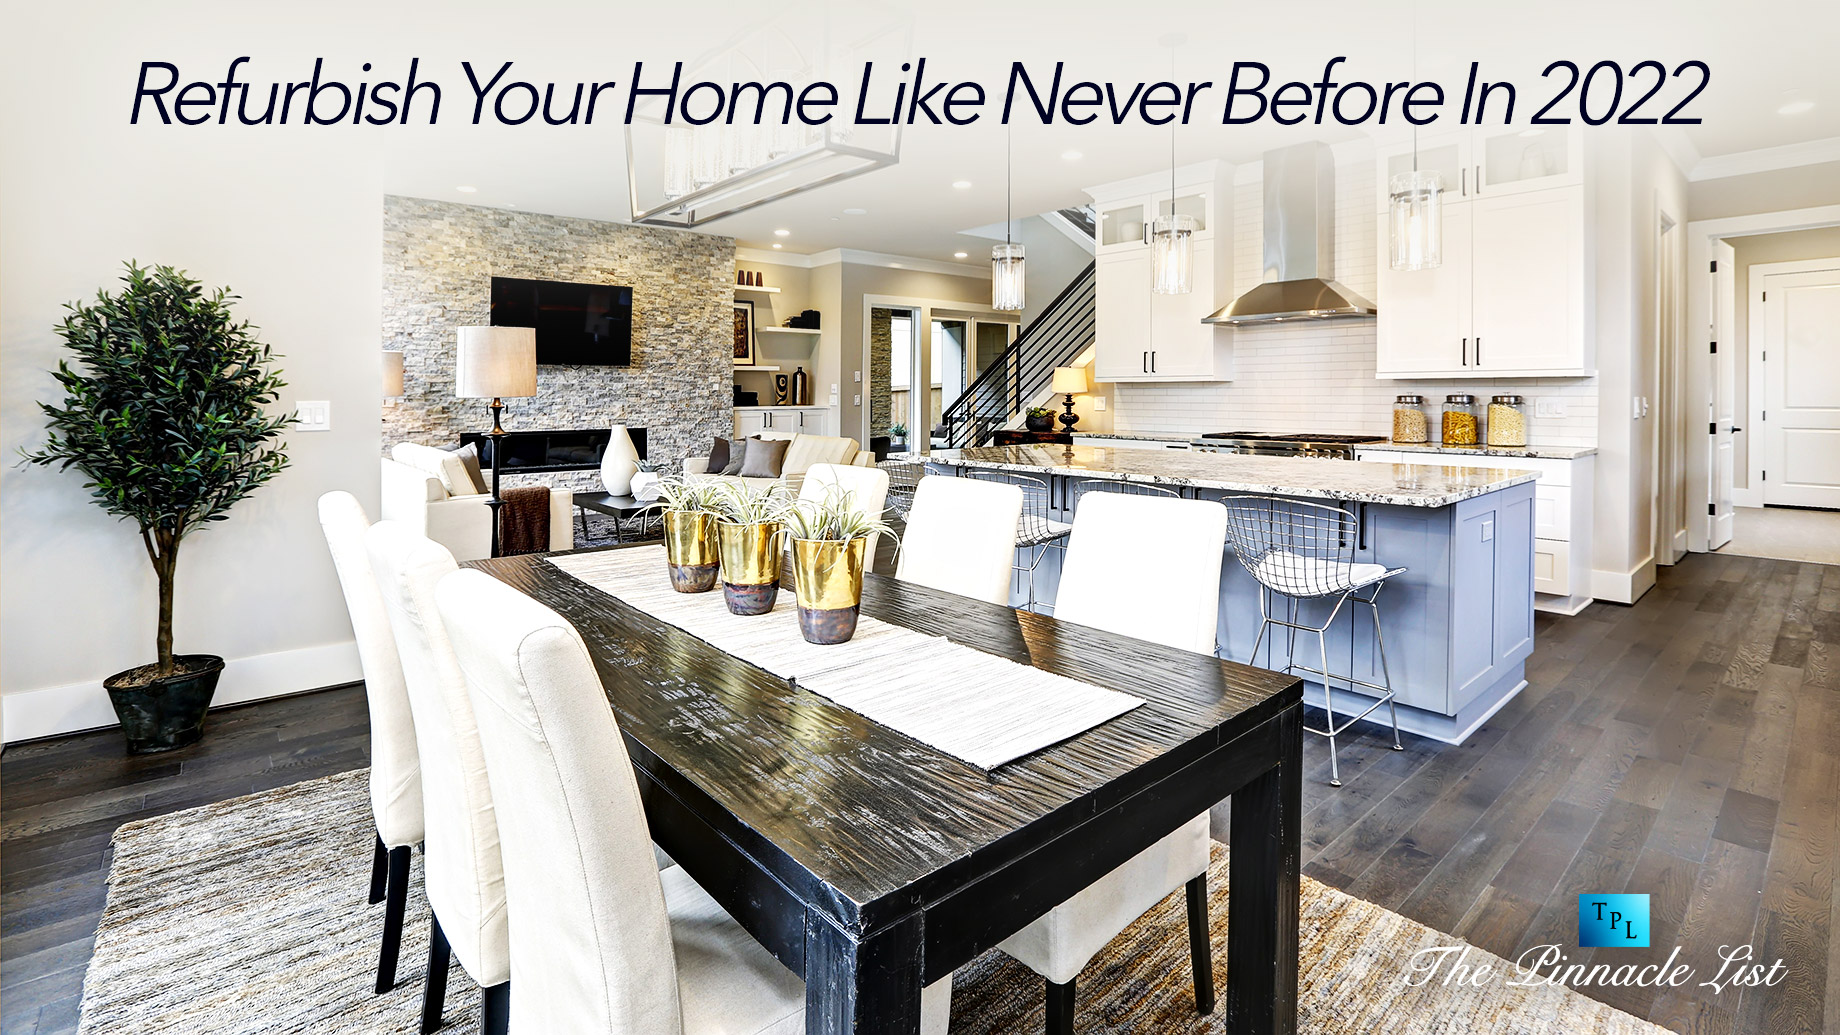 Refurbish Your Home Like Never Before In 2022